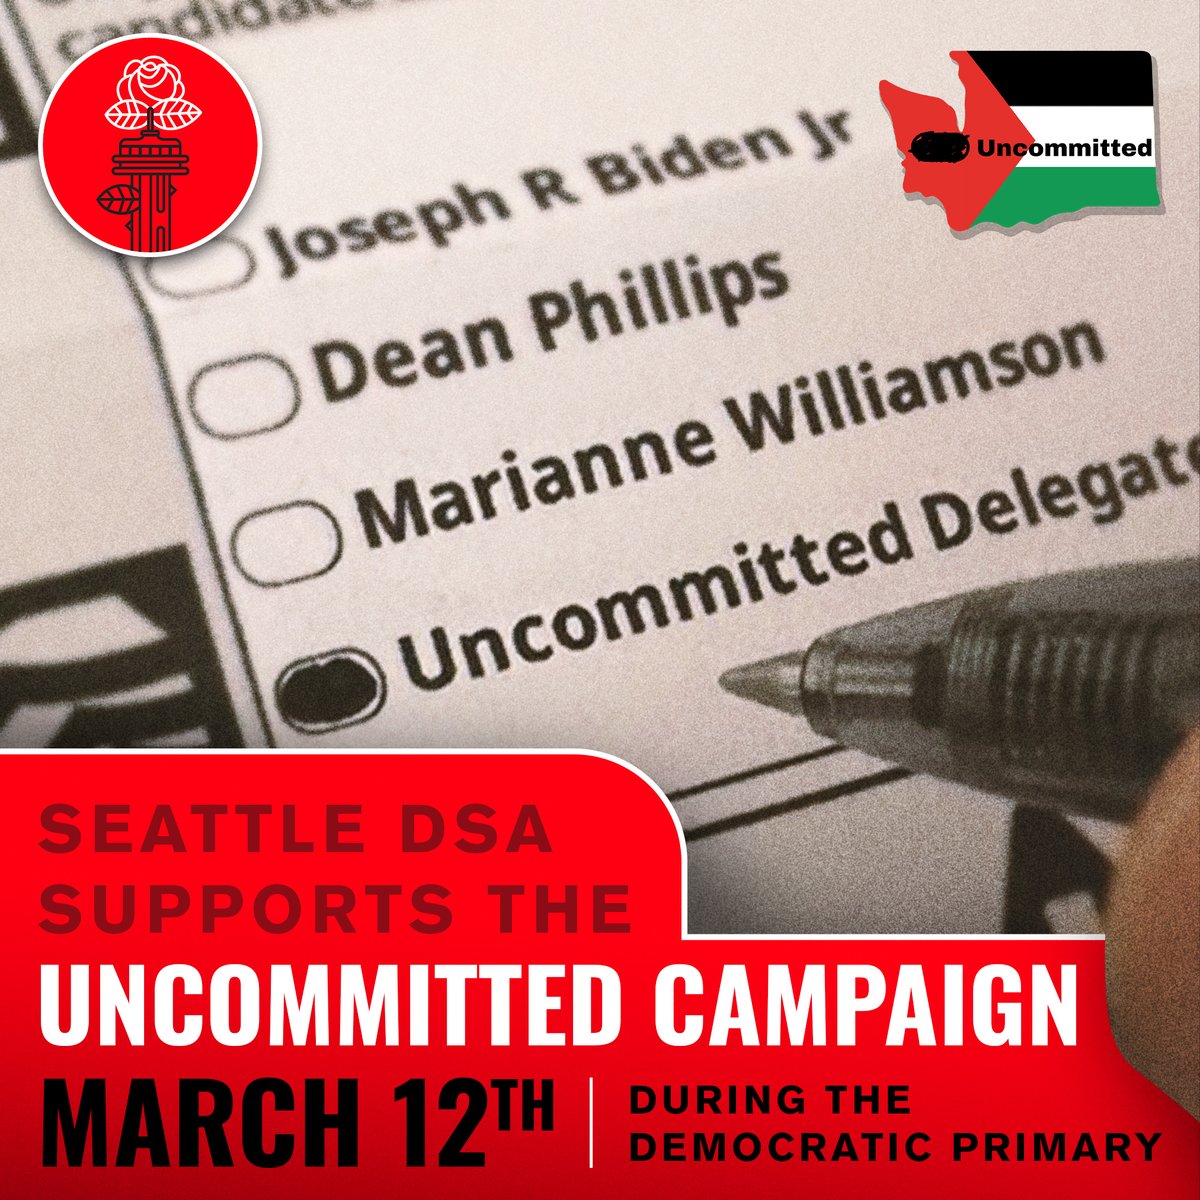 We are hosting events and phonebanks all the way up to the March 12th primary election! See how the uncommitted Washington campaign fits into your schedule by checking out our calendar today. We have a chance to make our voice heard, let's take it! seattledsa.org/events/